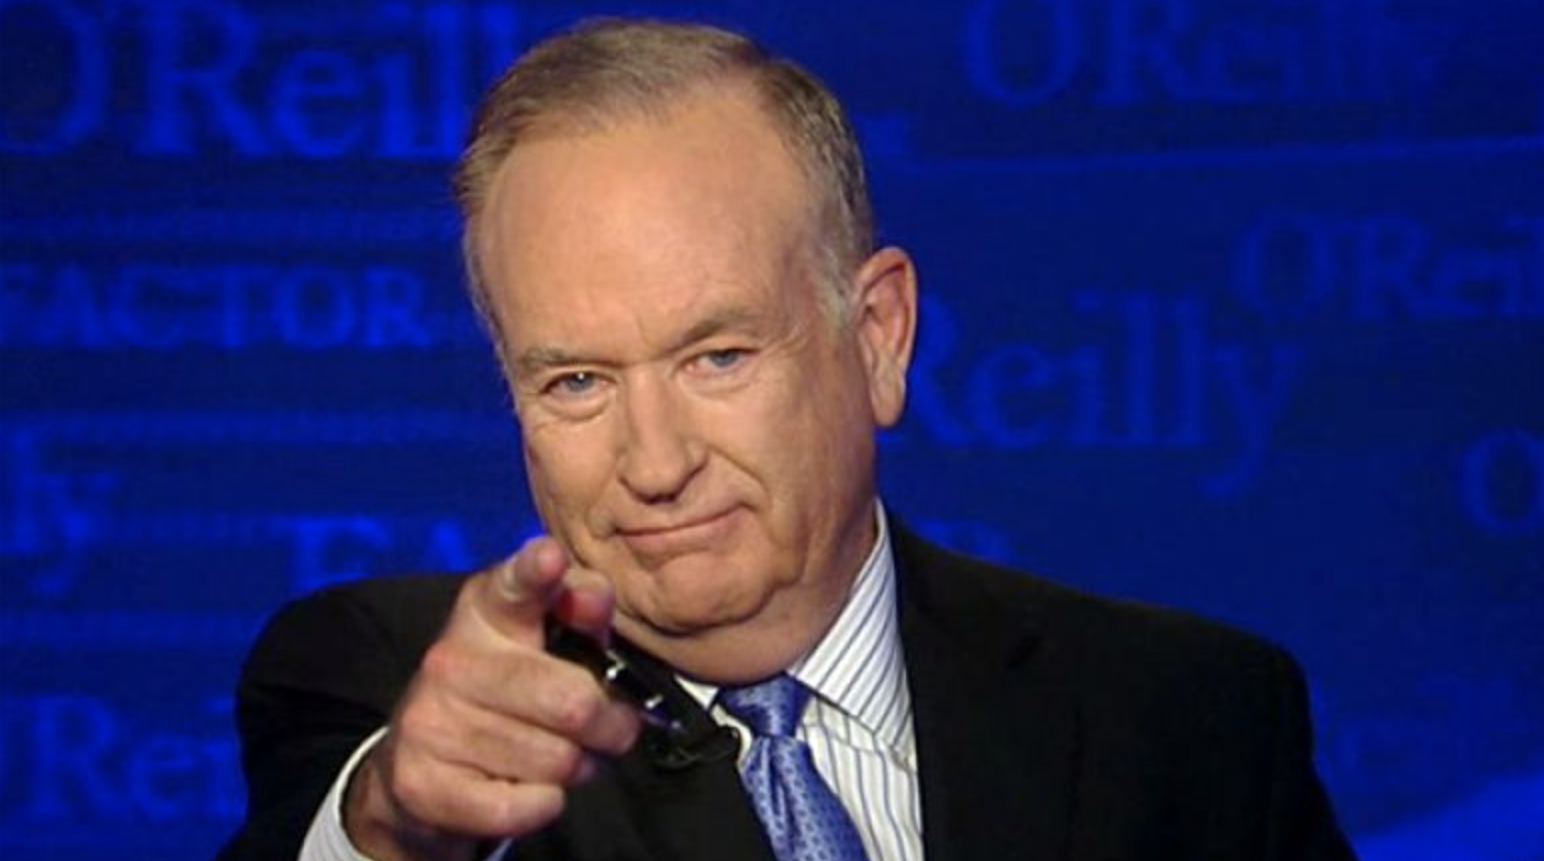 Bill O'Reilly Accuser Says He Called Her "Hot Chocolate"